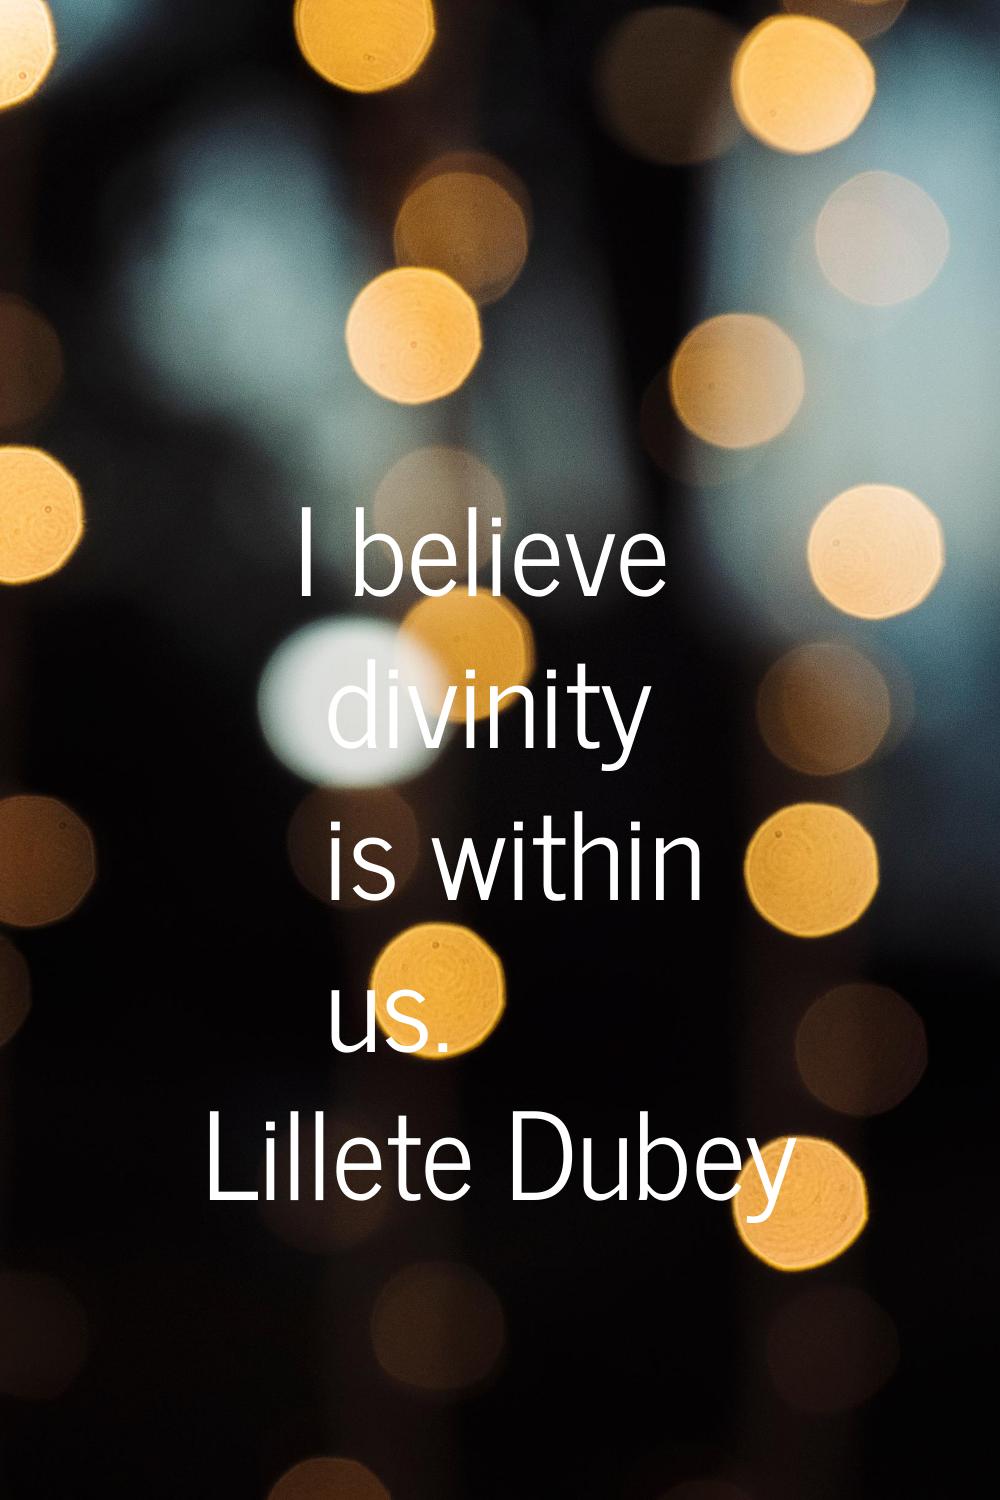 I believe divinity is within us.